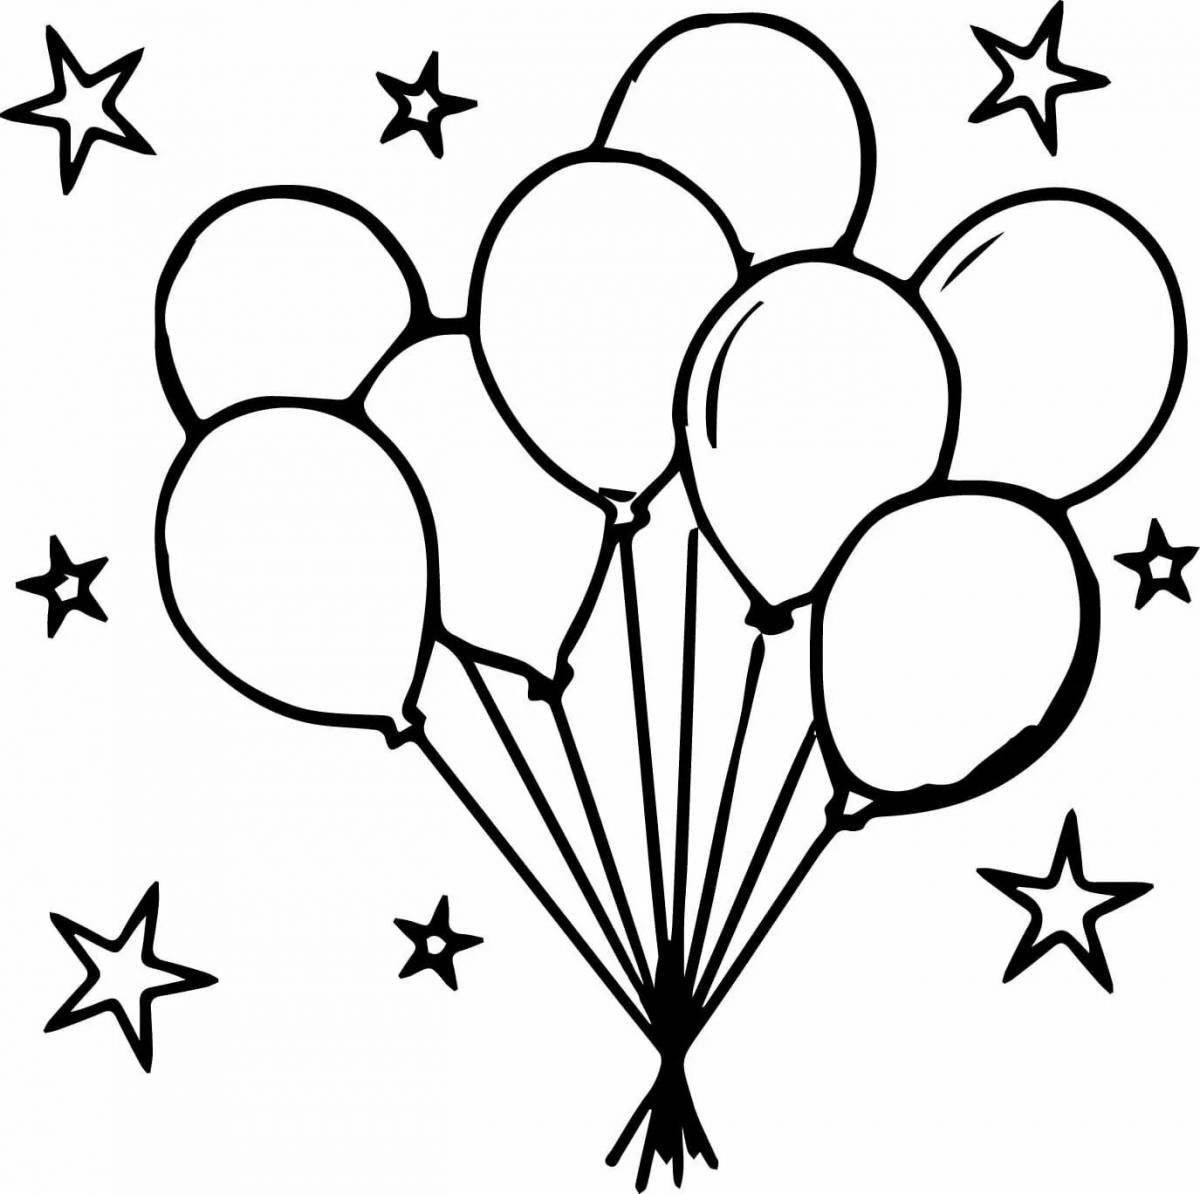 Amazing coloring page with balloons for kids